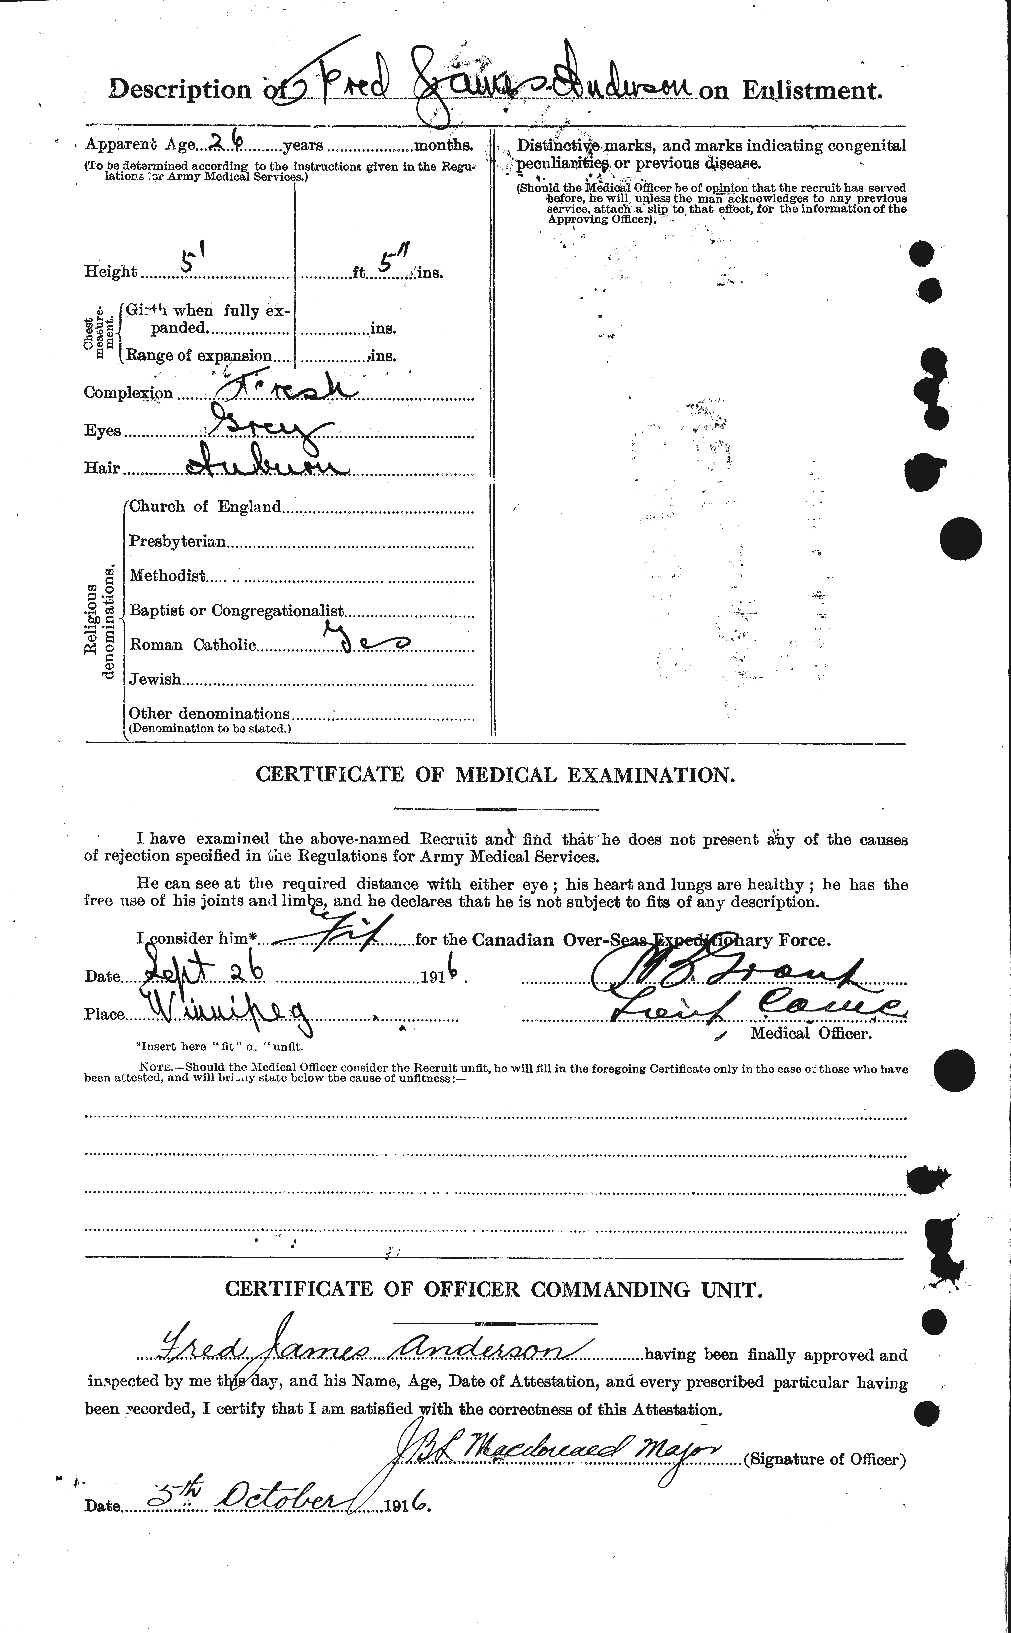 Personnel Records of the First World War - CEF 209832b